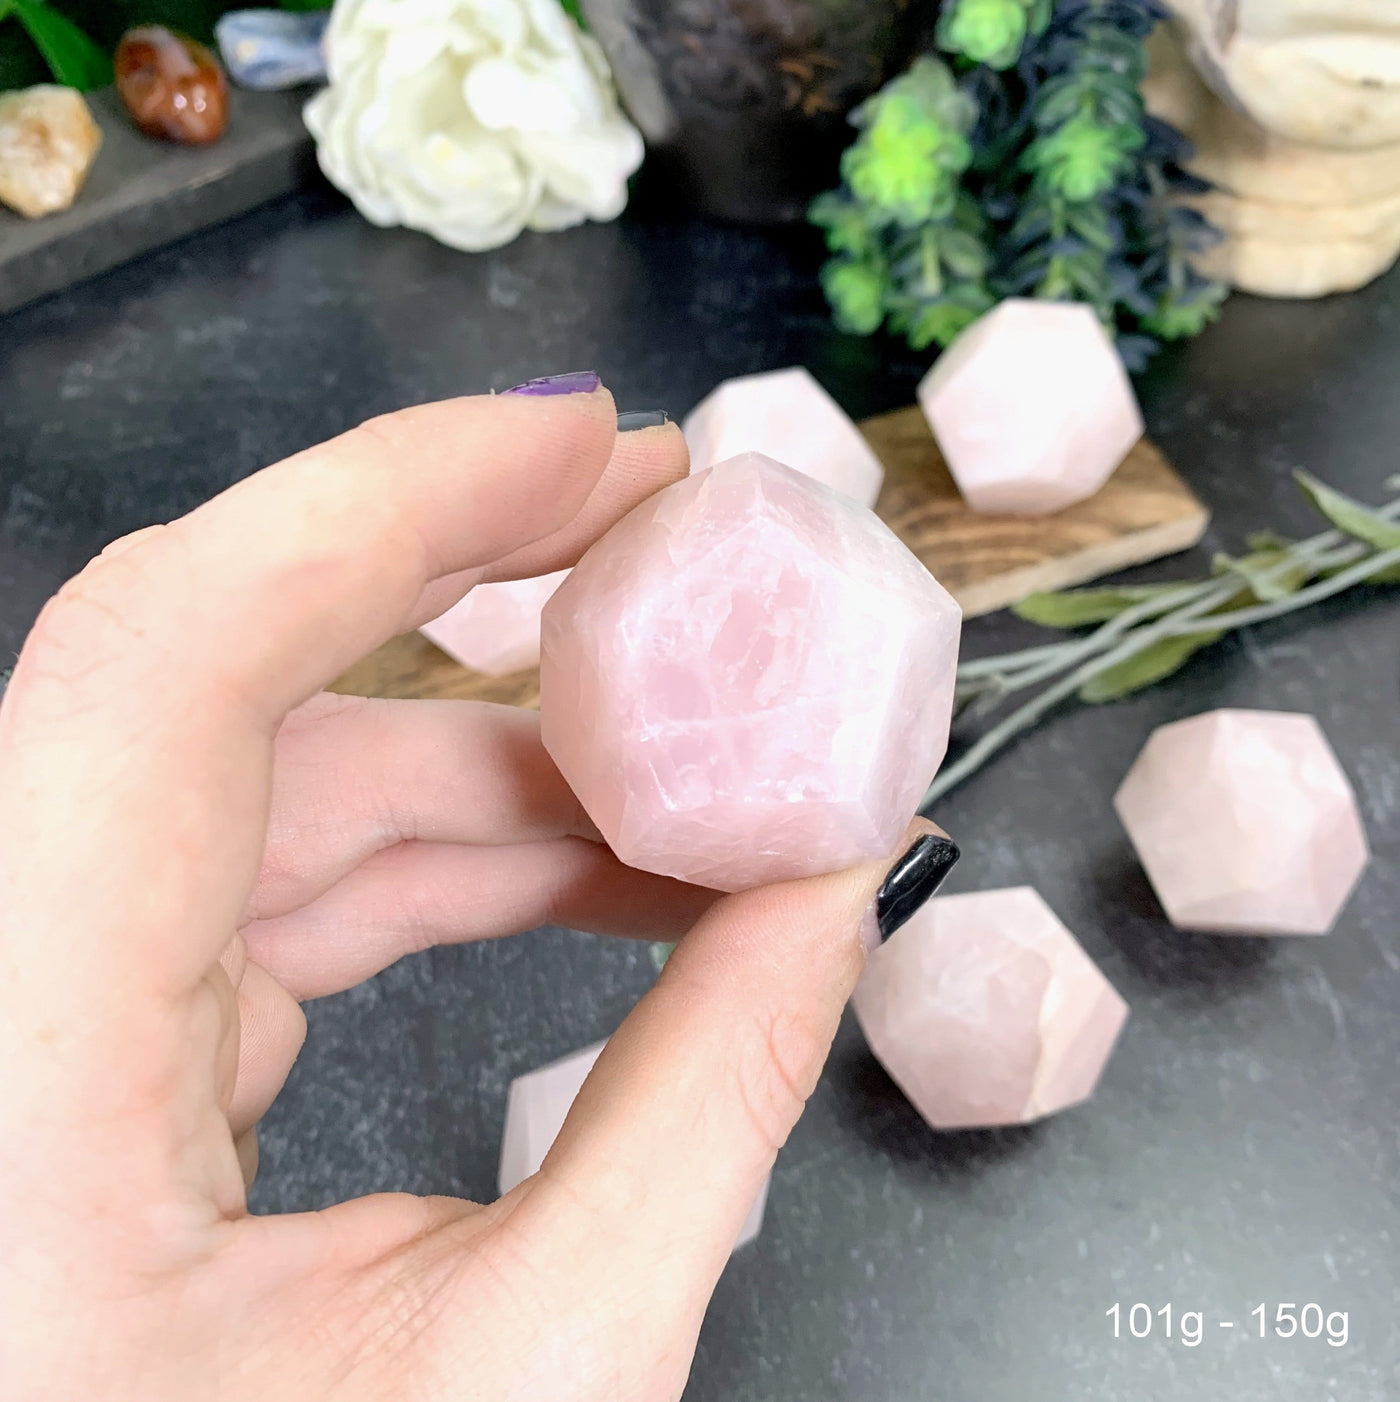 Hand holding up 100-150g Rose Quartz Dodecahedron with others and decorations blurred in the background